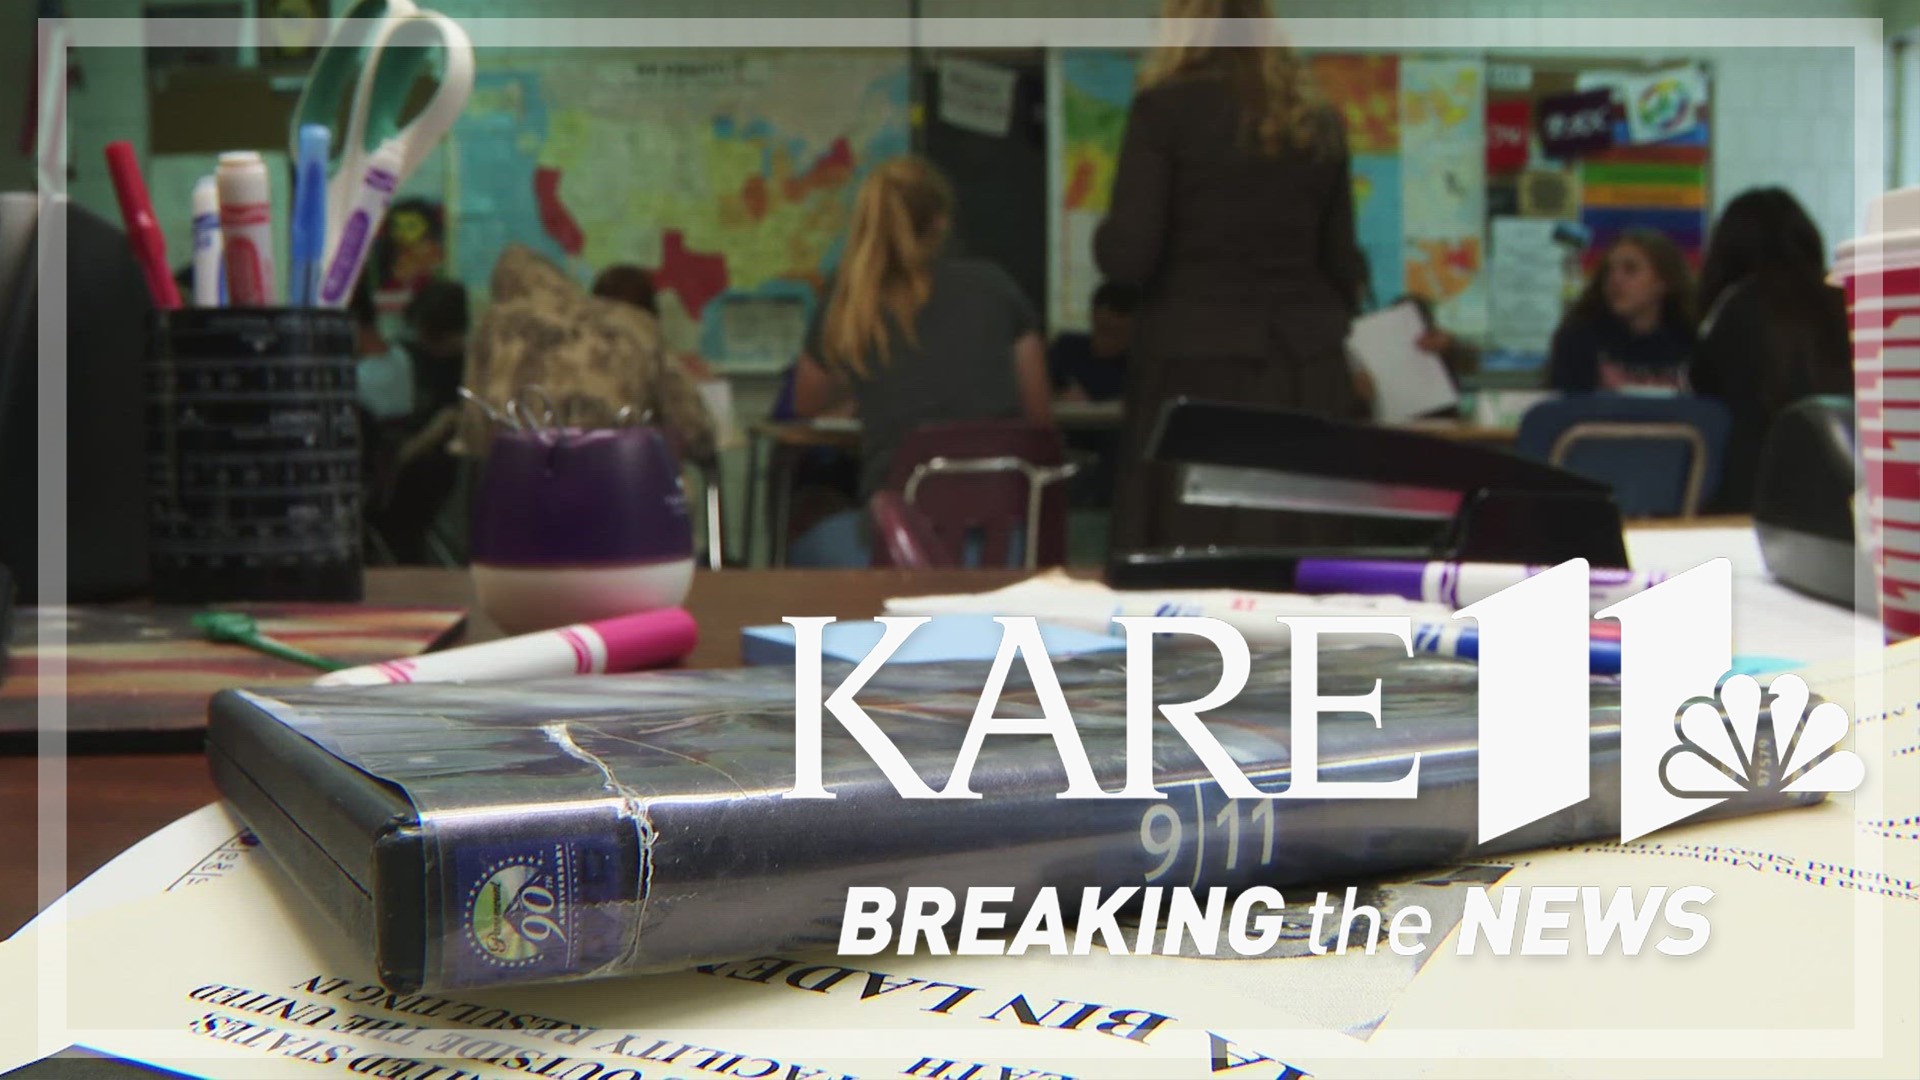 Kari Rise will never forget experiencing 9/11 with students inside her St. Paul classroom, and now she's drawing on it teach a generation that never lived it.